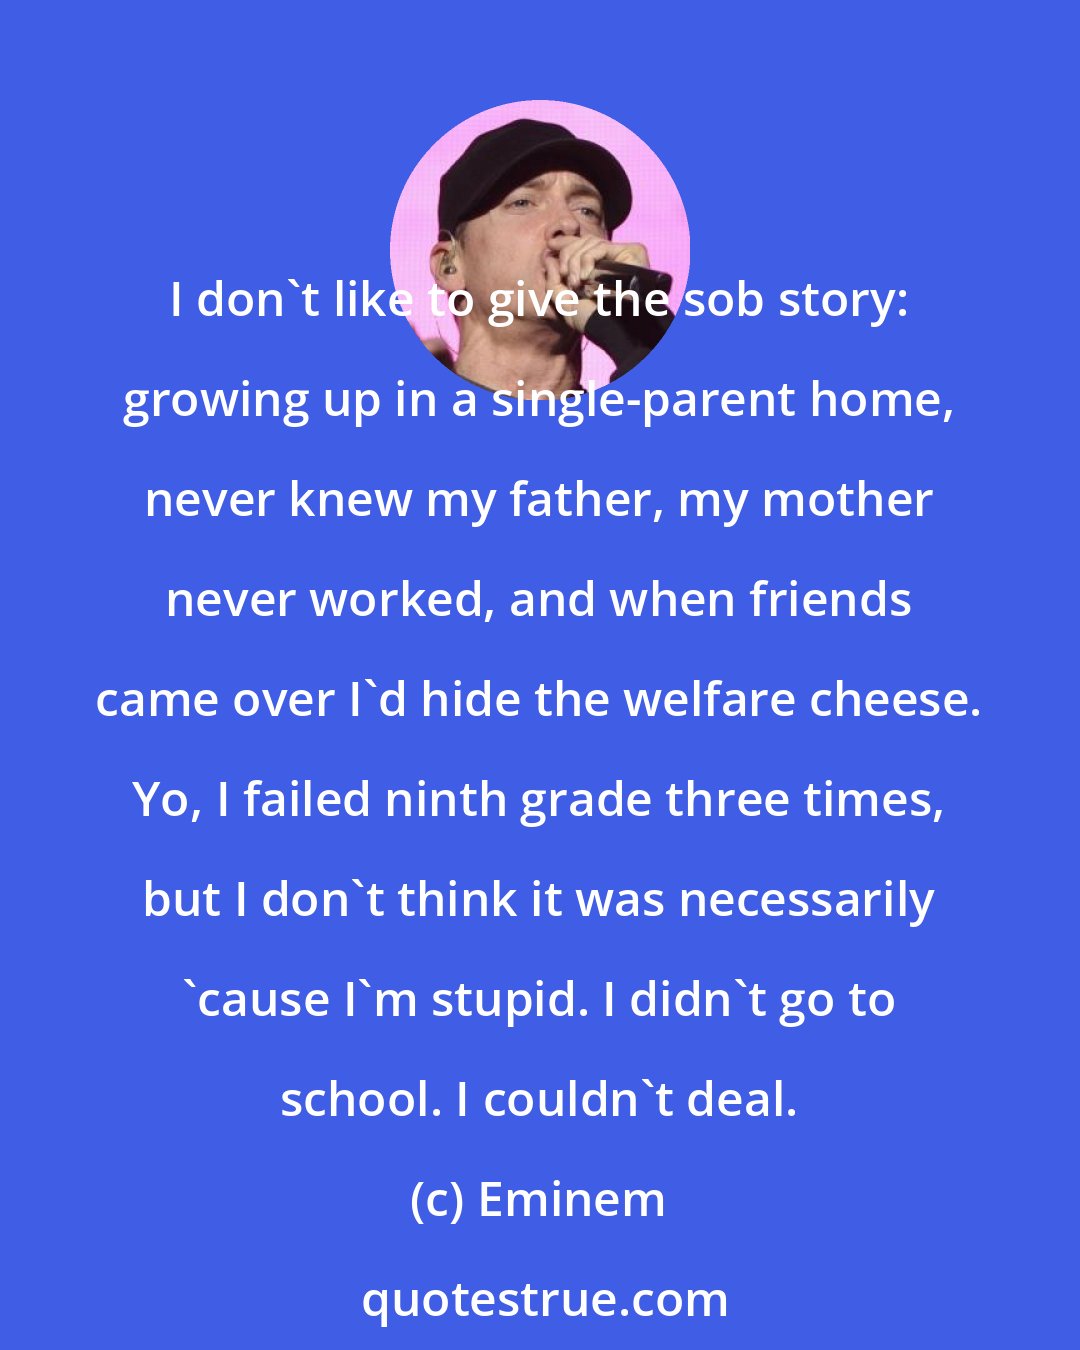 Eminem: I don't like to give the sob story: growing up in a single-parent home, never knew my father, my mother never worked, and when friends came over I'd hide the welfare cheese. Yo, I failed ninth grade three times, but I don't think it was necessarily 'cause I'm stupid. I didn't go to school. I couldn't deal.